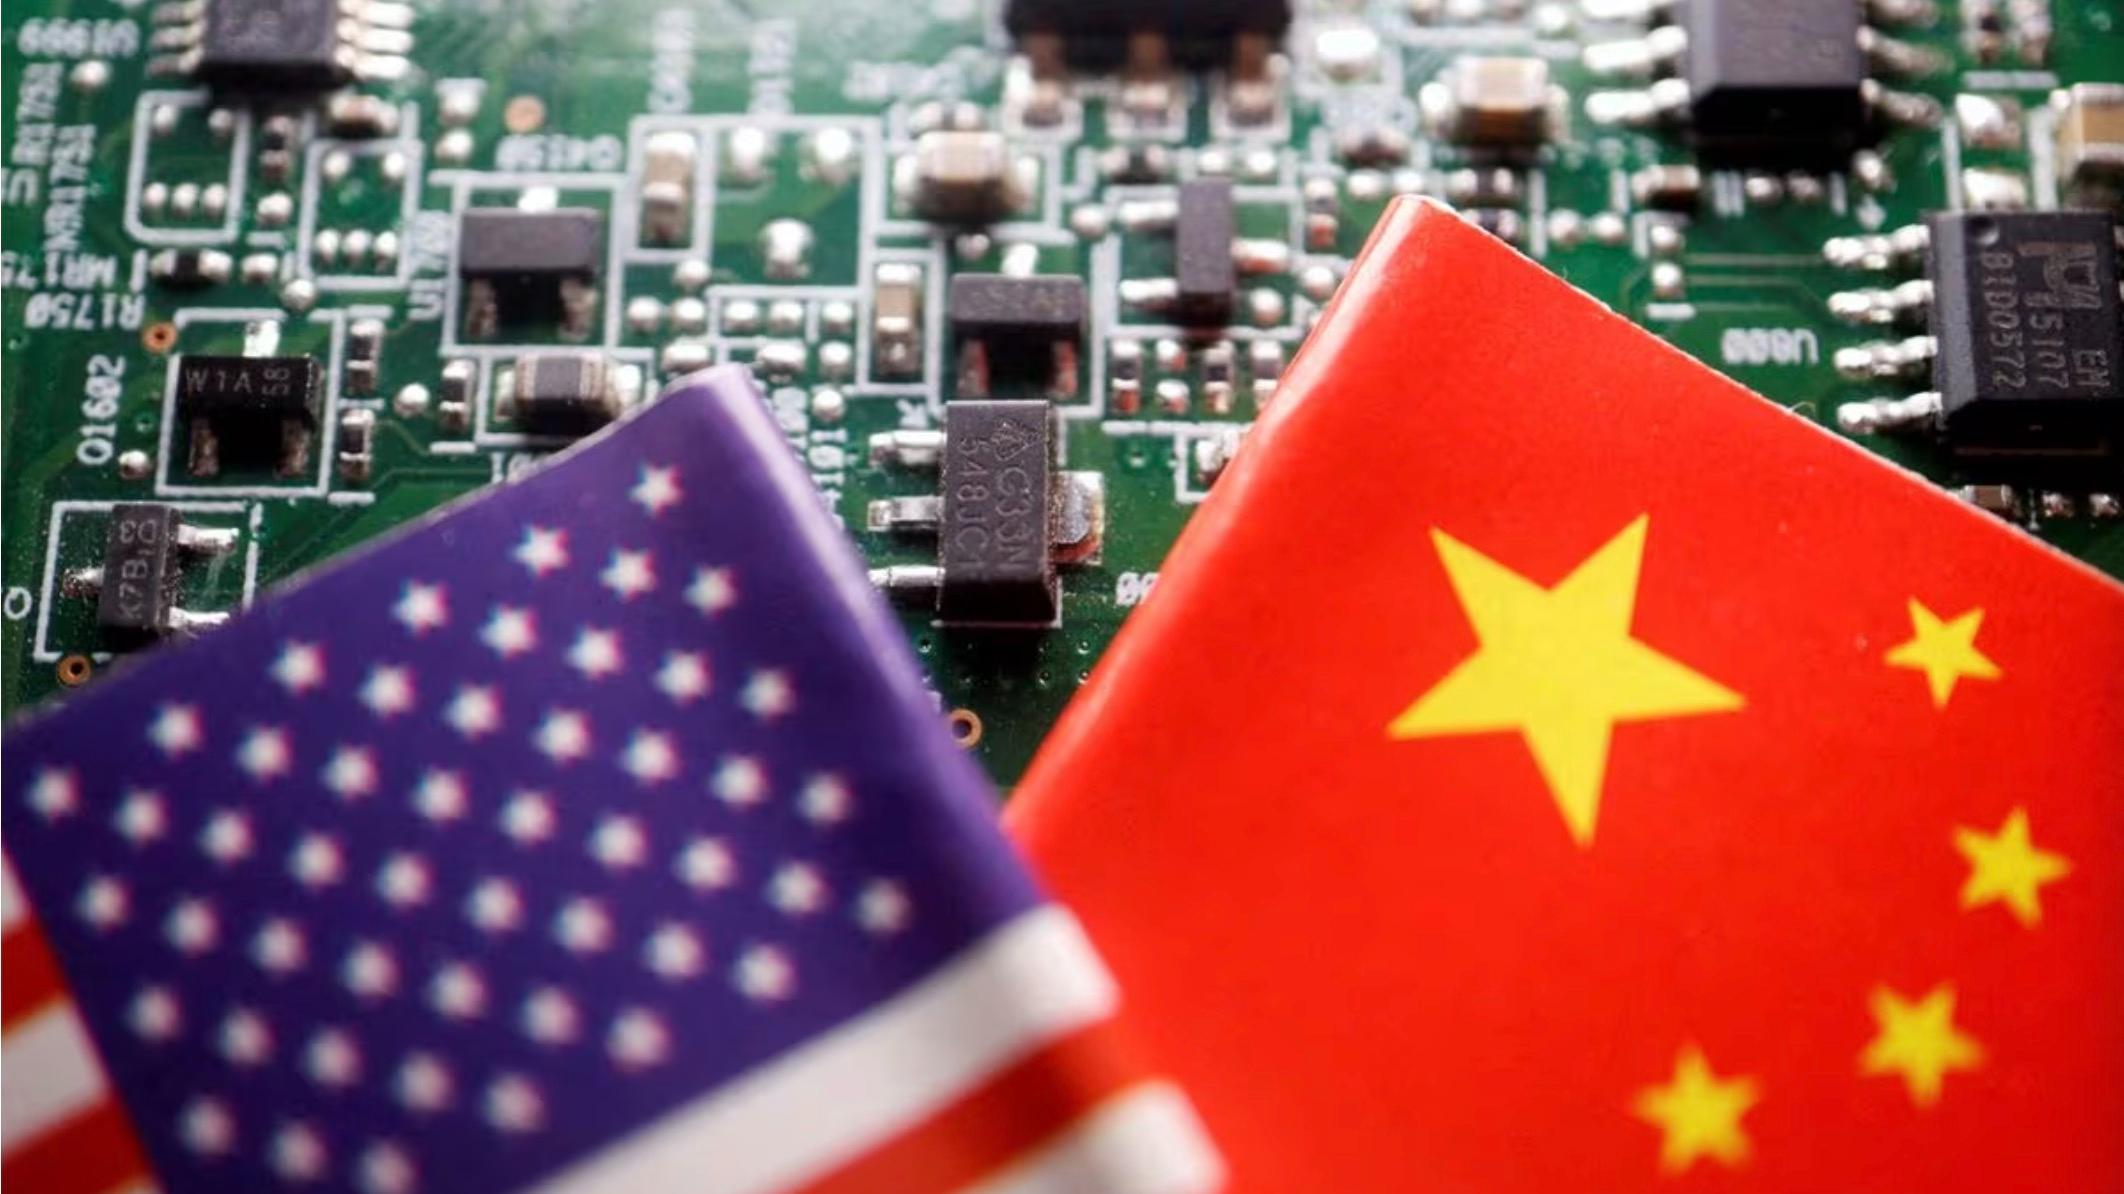 An illustration shows the national flags of China and U.S. displayed on a printed circuit board with semiconductor chips. /Reuters